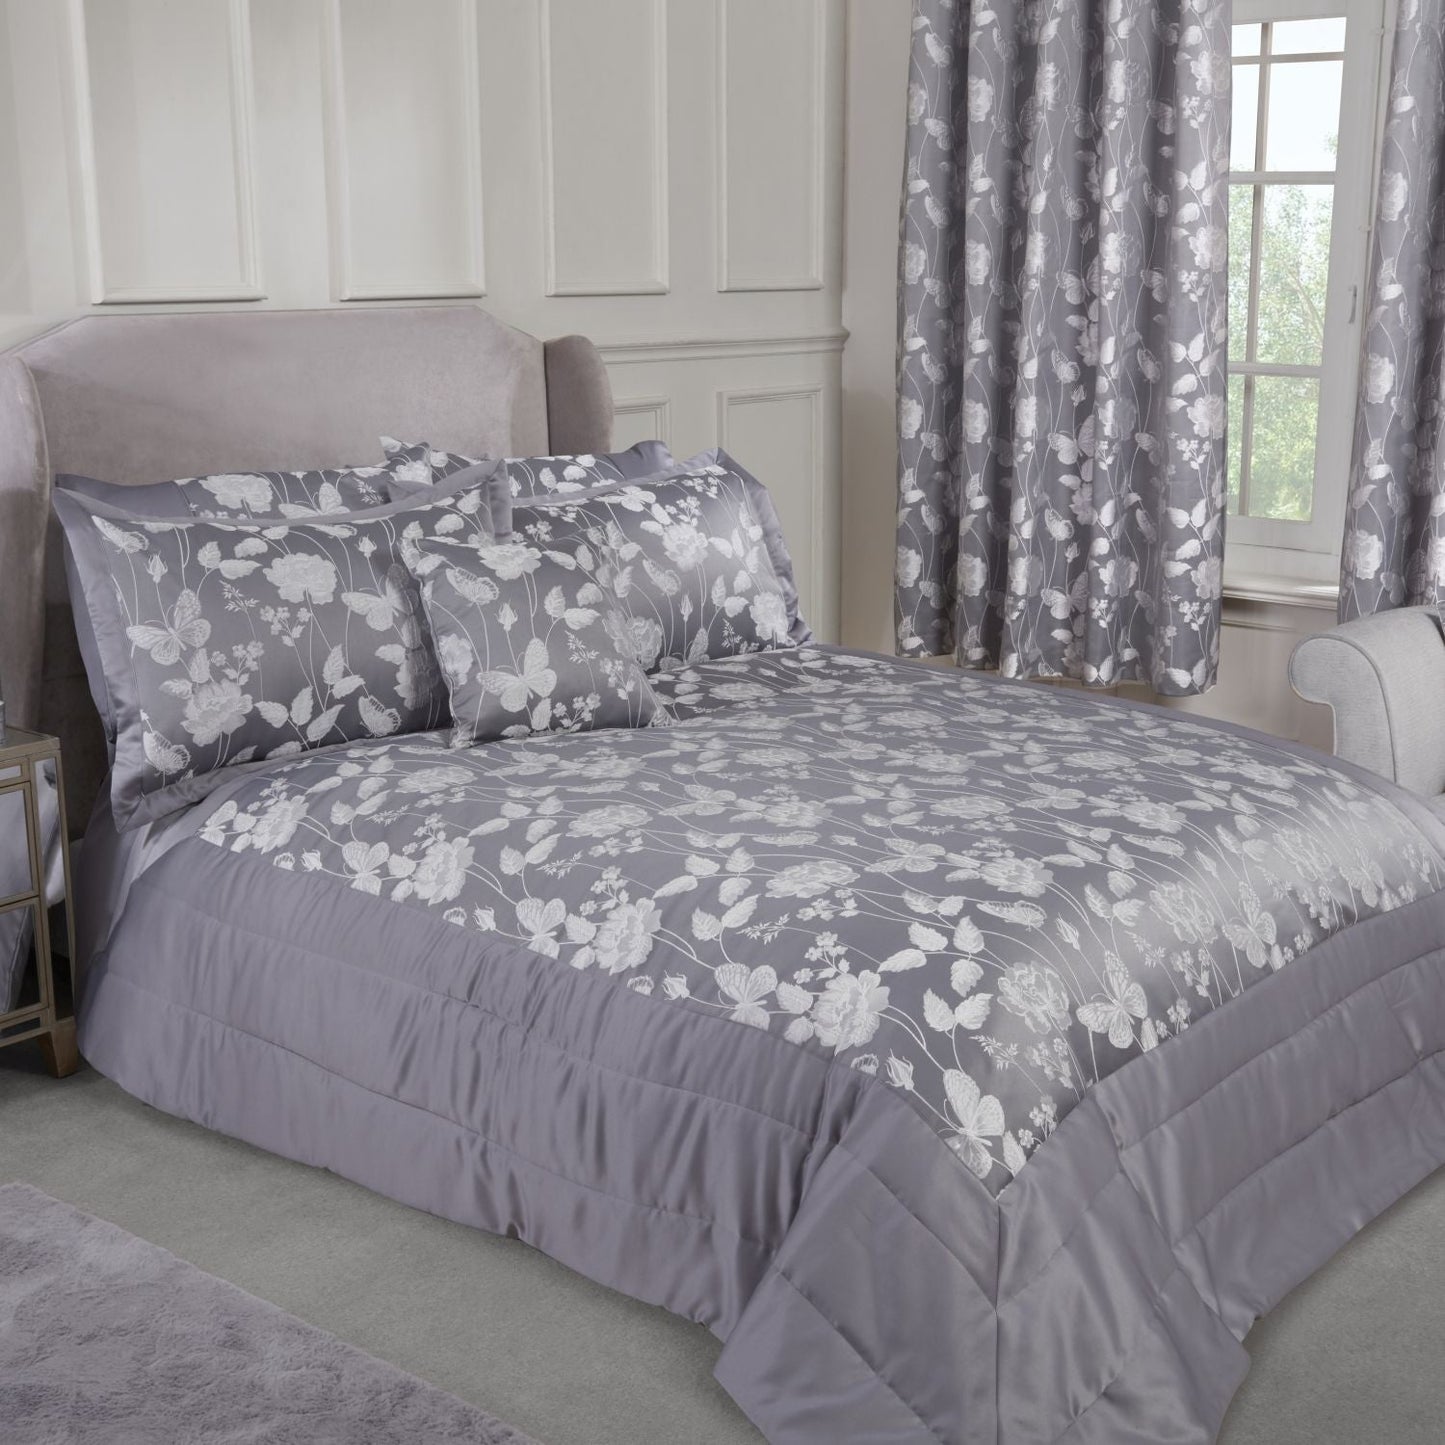 Butterfly Meadow Silver Embellished Jacquard Quilted Bedspread Set